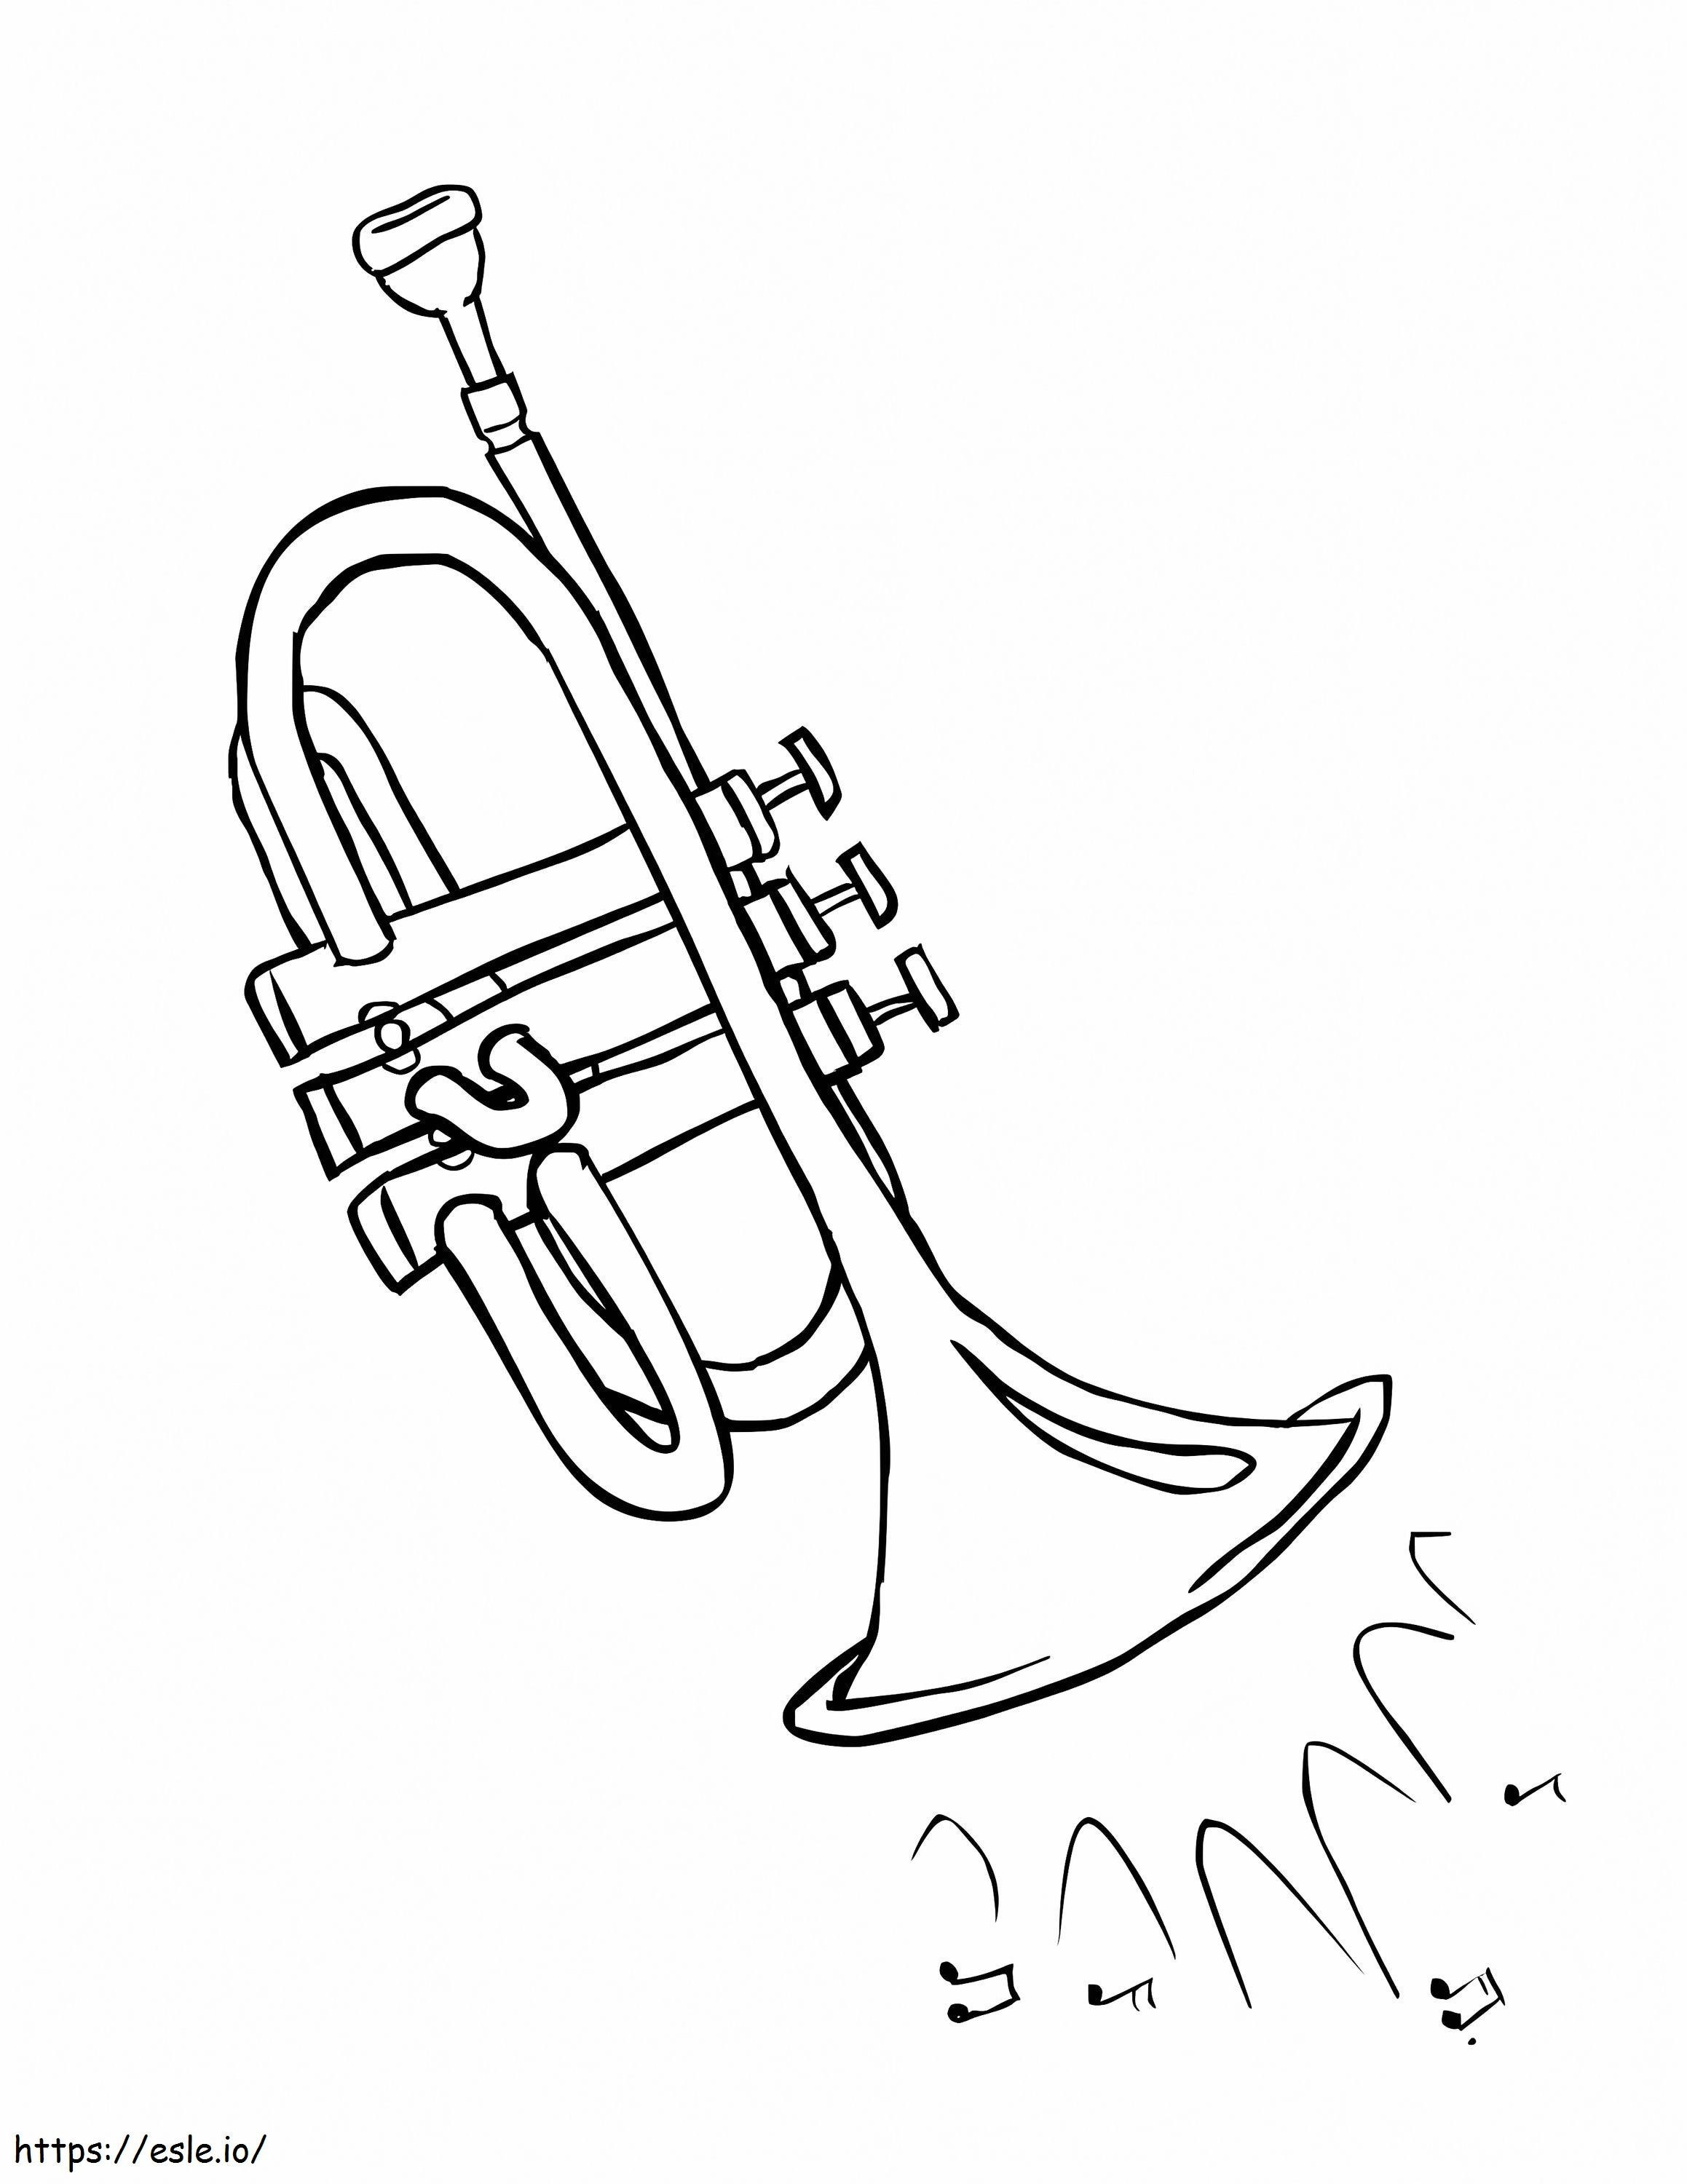 Single Trumpet 5 coloring page